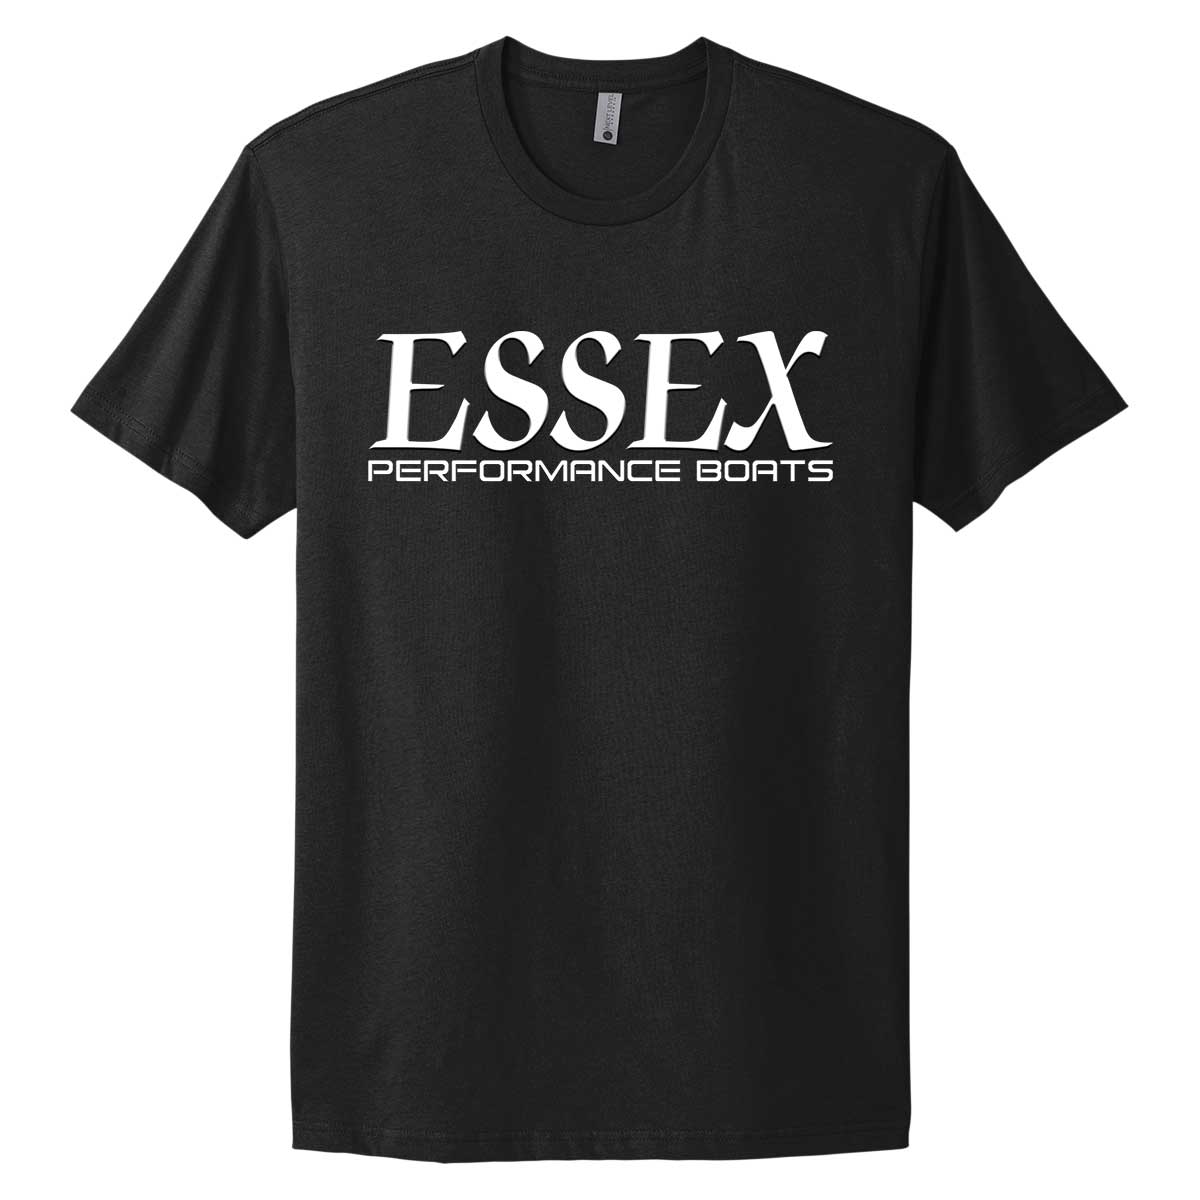 Essex Performance Boats - 100% Combed Ringspun Cotton Fine Jersey T-Shirt